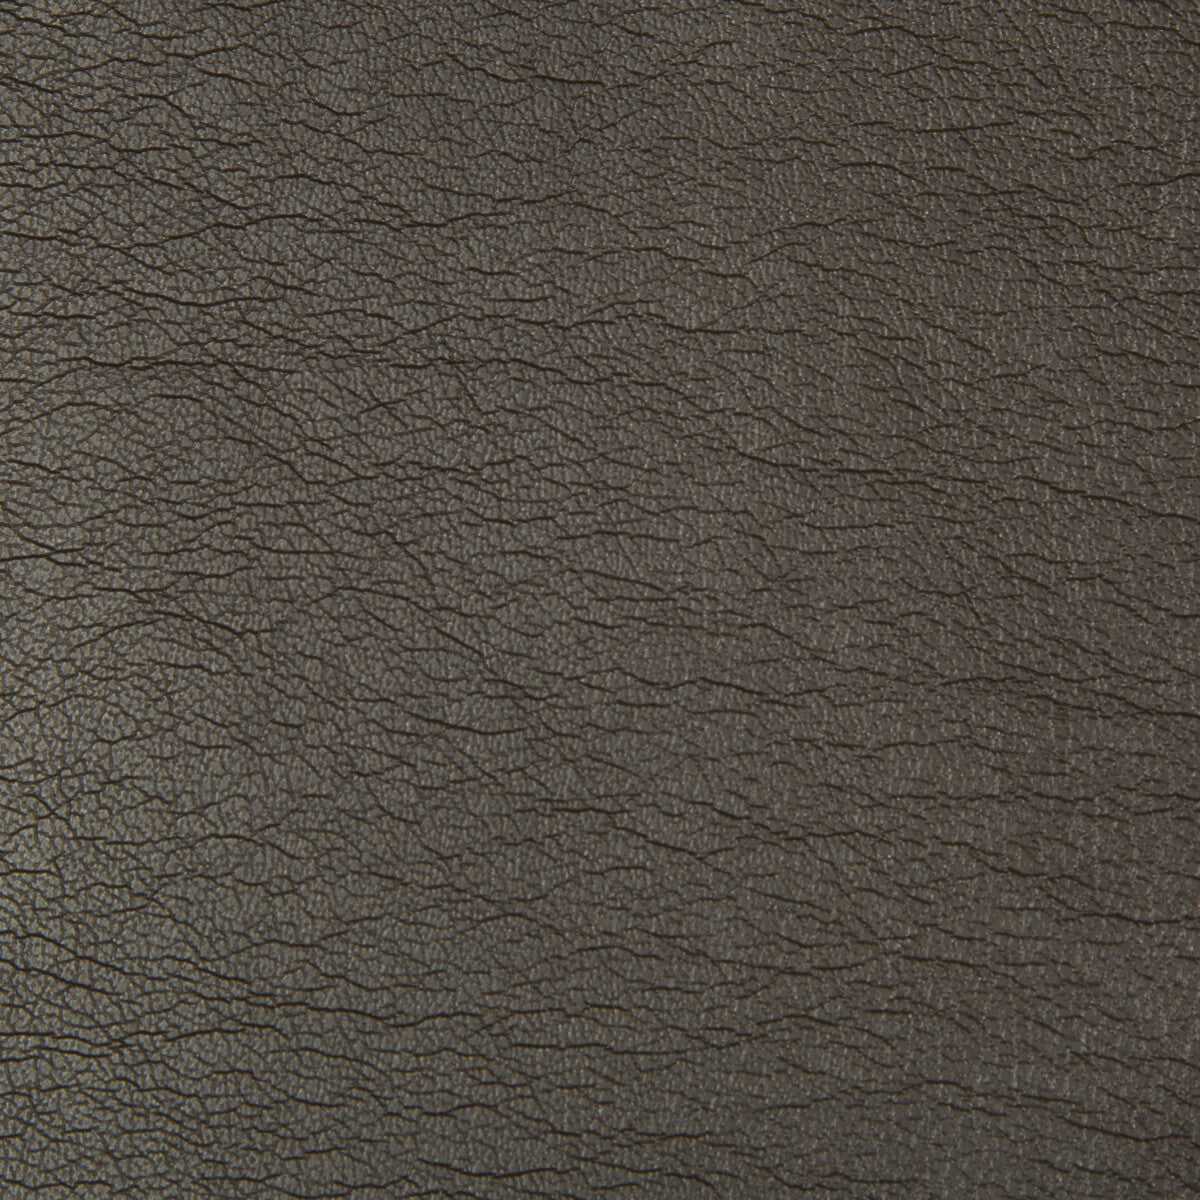 Optima fabric in chocolate color - pattern OPTIMA.86.0 - by Kravet Contract